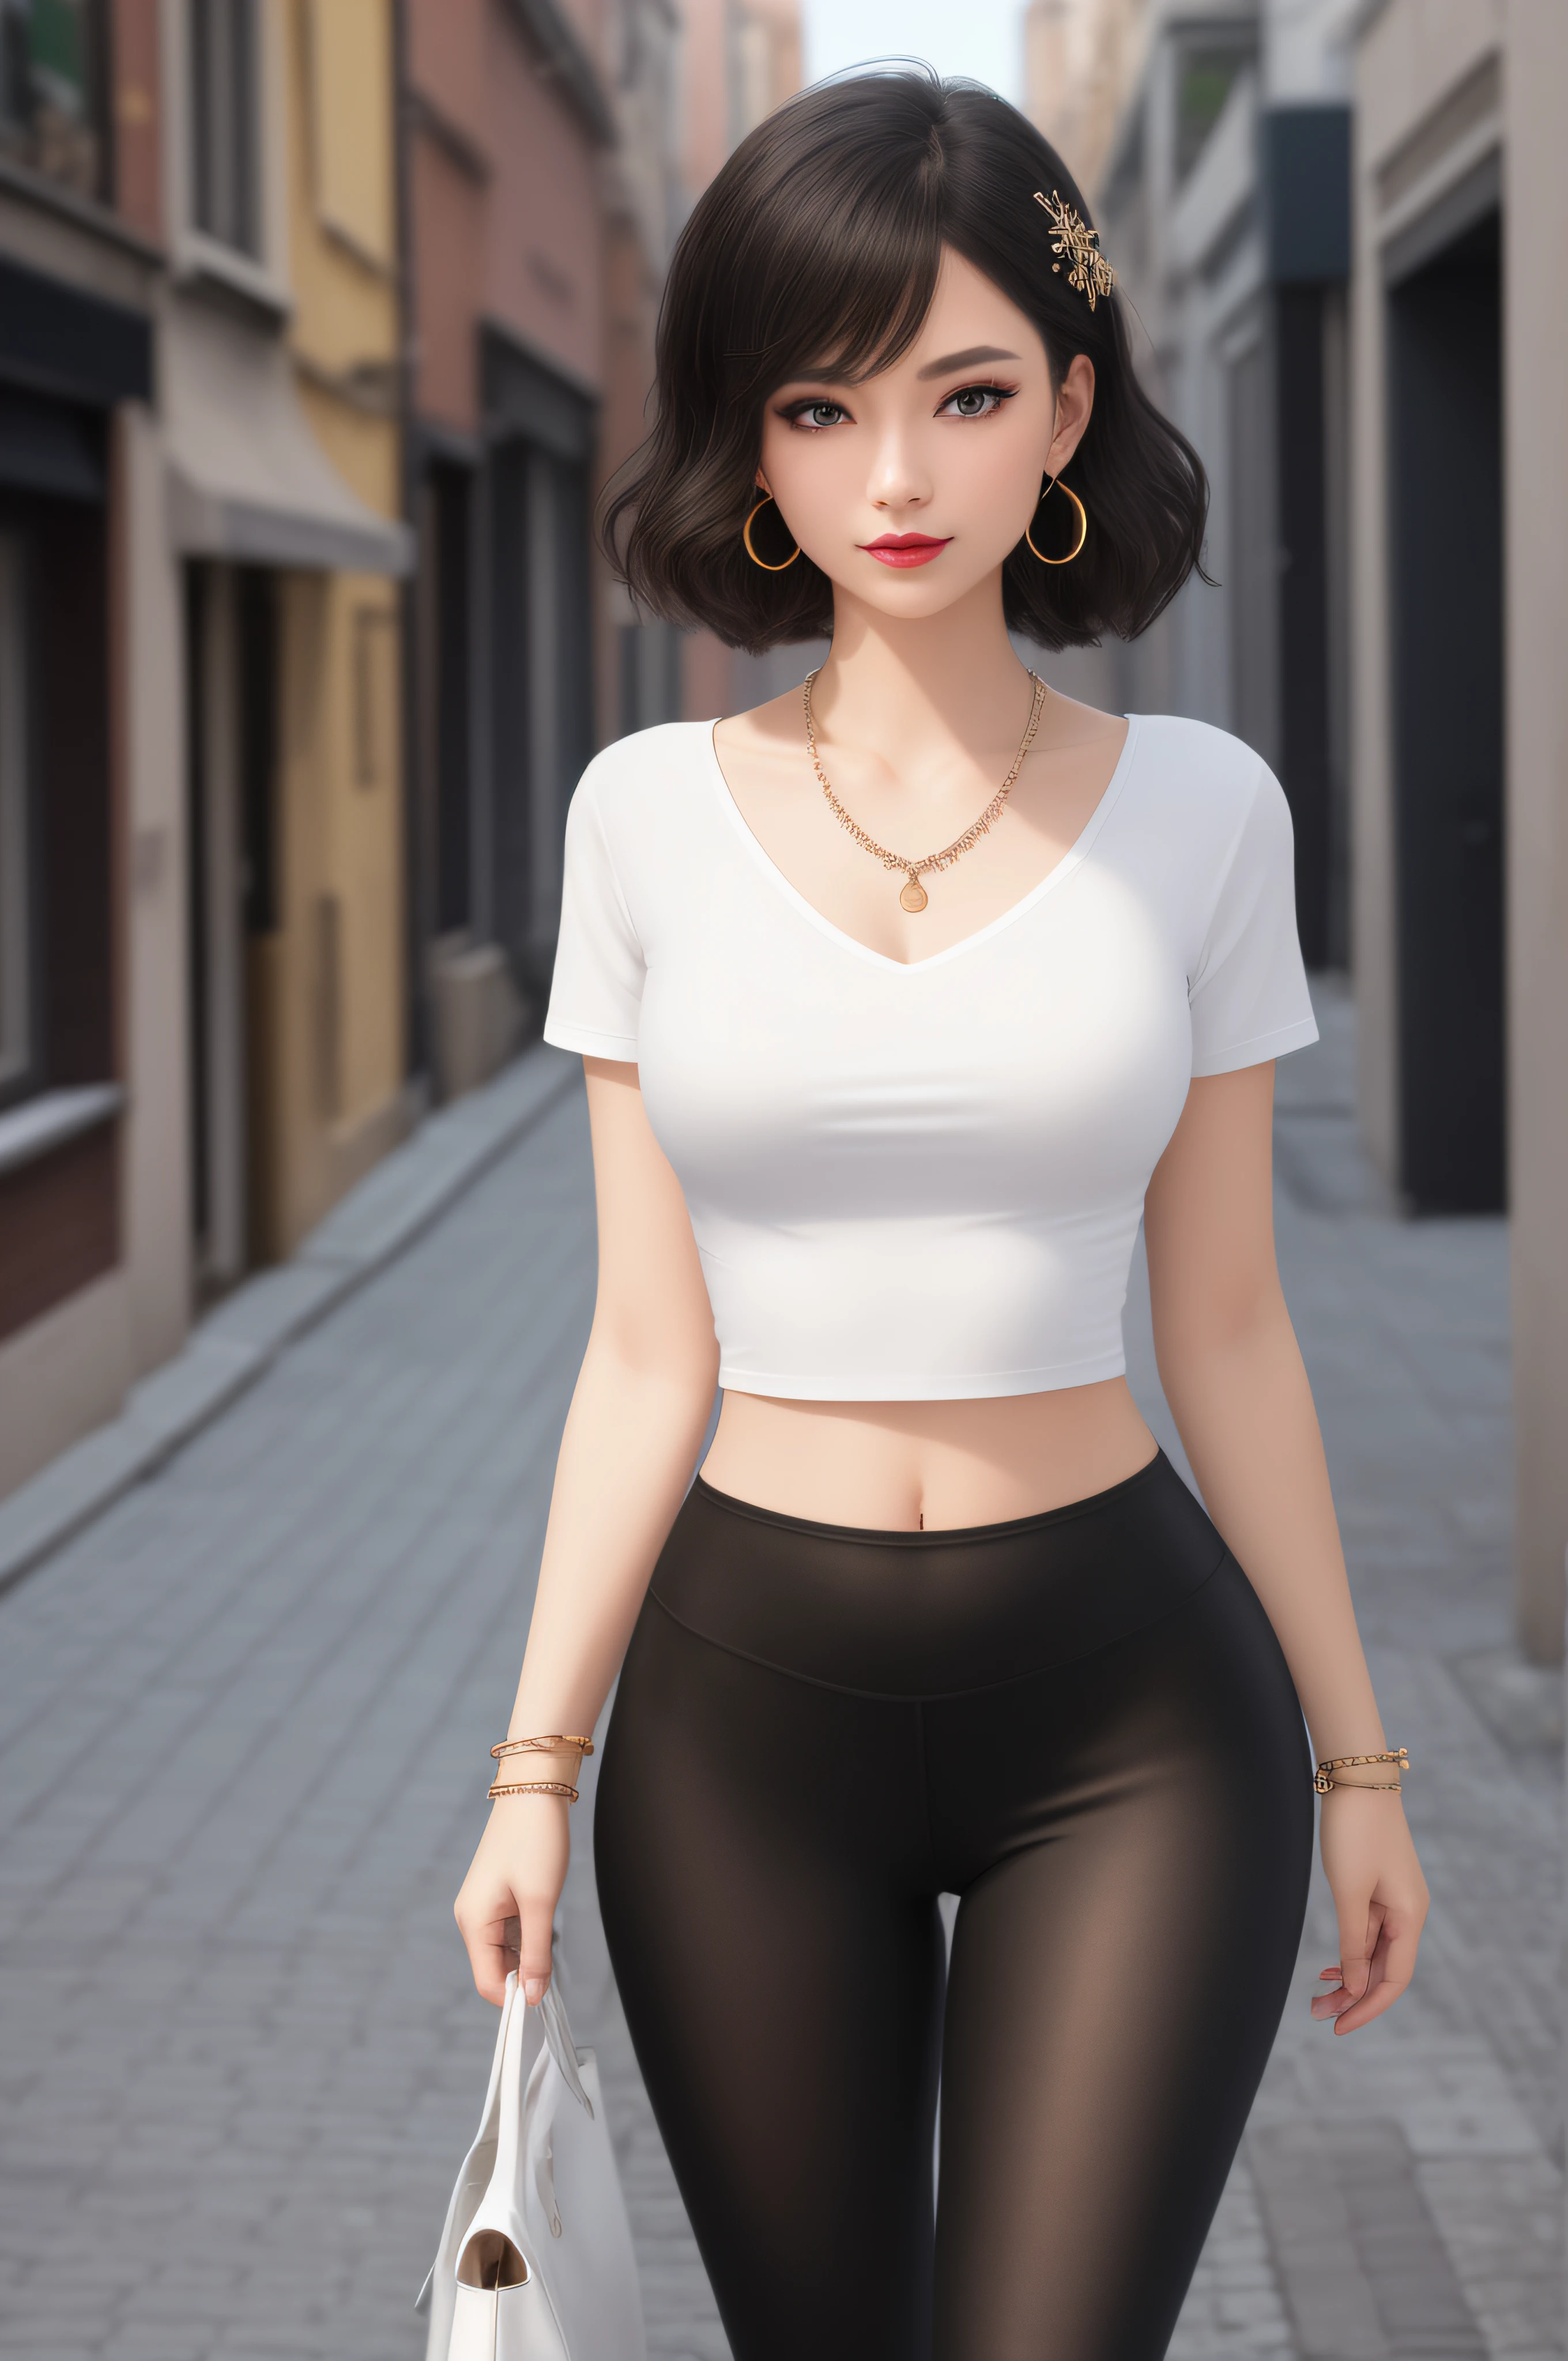 (Same Characters, Frontal), ((Best Quality)), ((Masterpiece)), ((Ultra High Resolution)), (Intricate Details), (Soft Lighting), Cinematic, Dramatic, Composition, Clear Sky, Fauvism, Surreal, Epic, Awe, Crazy Level of Detail, 1 Woman, (Beautiful Body), White Leggings, (White Top) (Short and Tight Top), (Full Body Shot), (Black hair: 1.5) High ponytail, 35mm, sharp, surreal, necklace, (detailed ornament), hair accessories, earrings, bracelets, rings, soft lips, pink lipstick, blue eyes, blonde ratio, wide shoulders, narrow waist, normal breasts, real human skin, lens flare, shadow, backlight, natural lighting, street background, smile, blush, depth of field, full body, standing, detailed face, detailed body, mesh, (full body: 1.6), (Bokeh: 1.1), Skyline, (Reality: 1.4), Looking at the viewer, Double eyelids, (standing: 1.3), Facing the viewer, Full Body Photo (FLS), Arms at Sides, Thigh Gap, Single, Vanishing Point